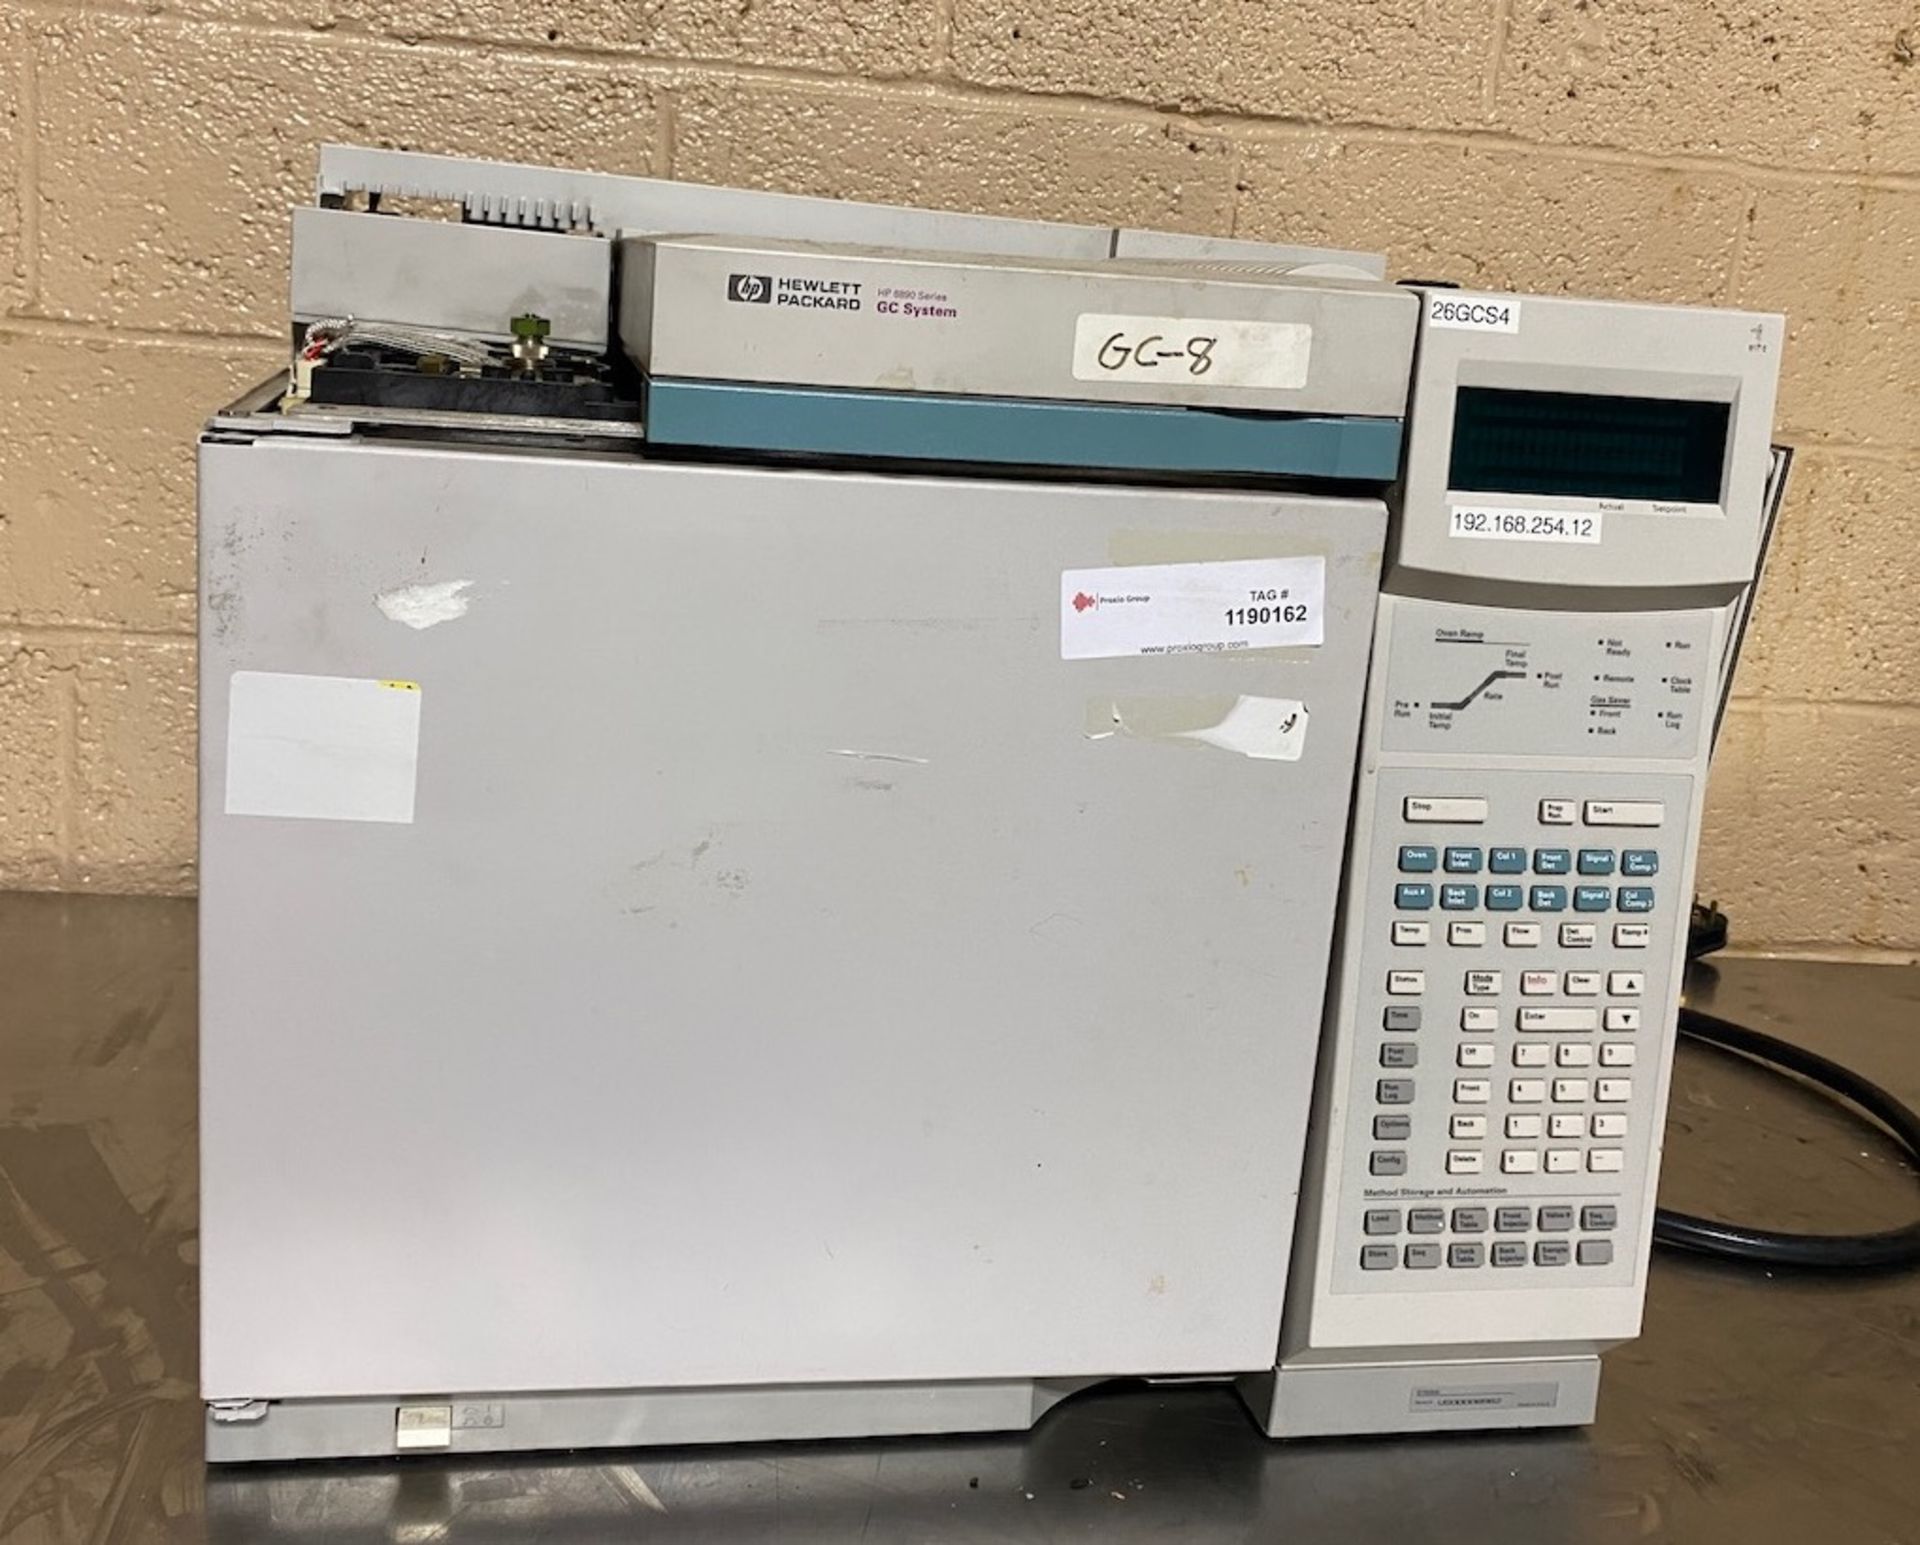 Hewlett Packard G1530A Gas Chromatograph with 6890 System, S/N US00008982. {TAG:1190162}